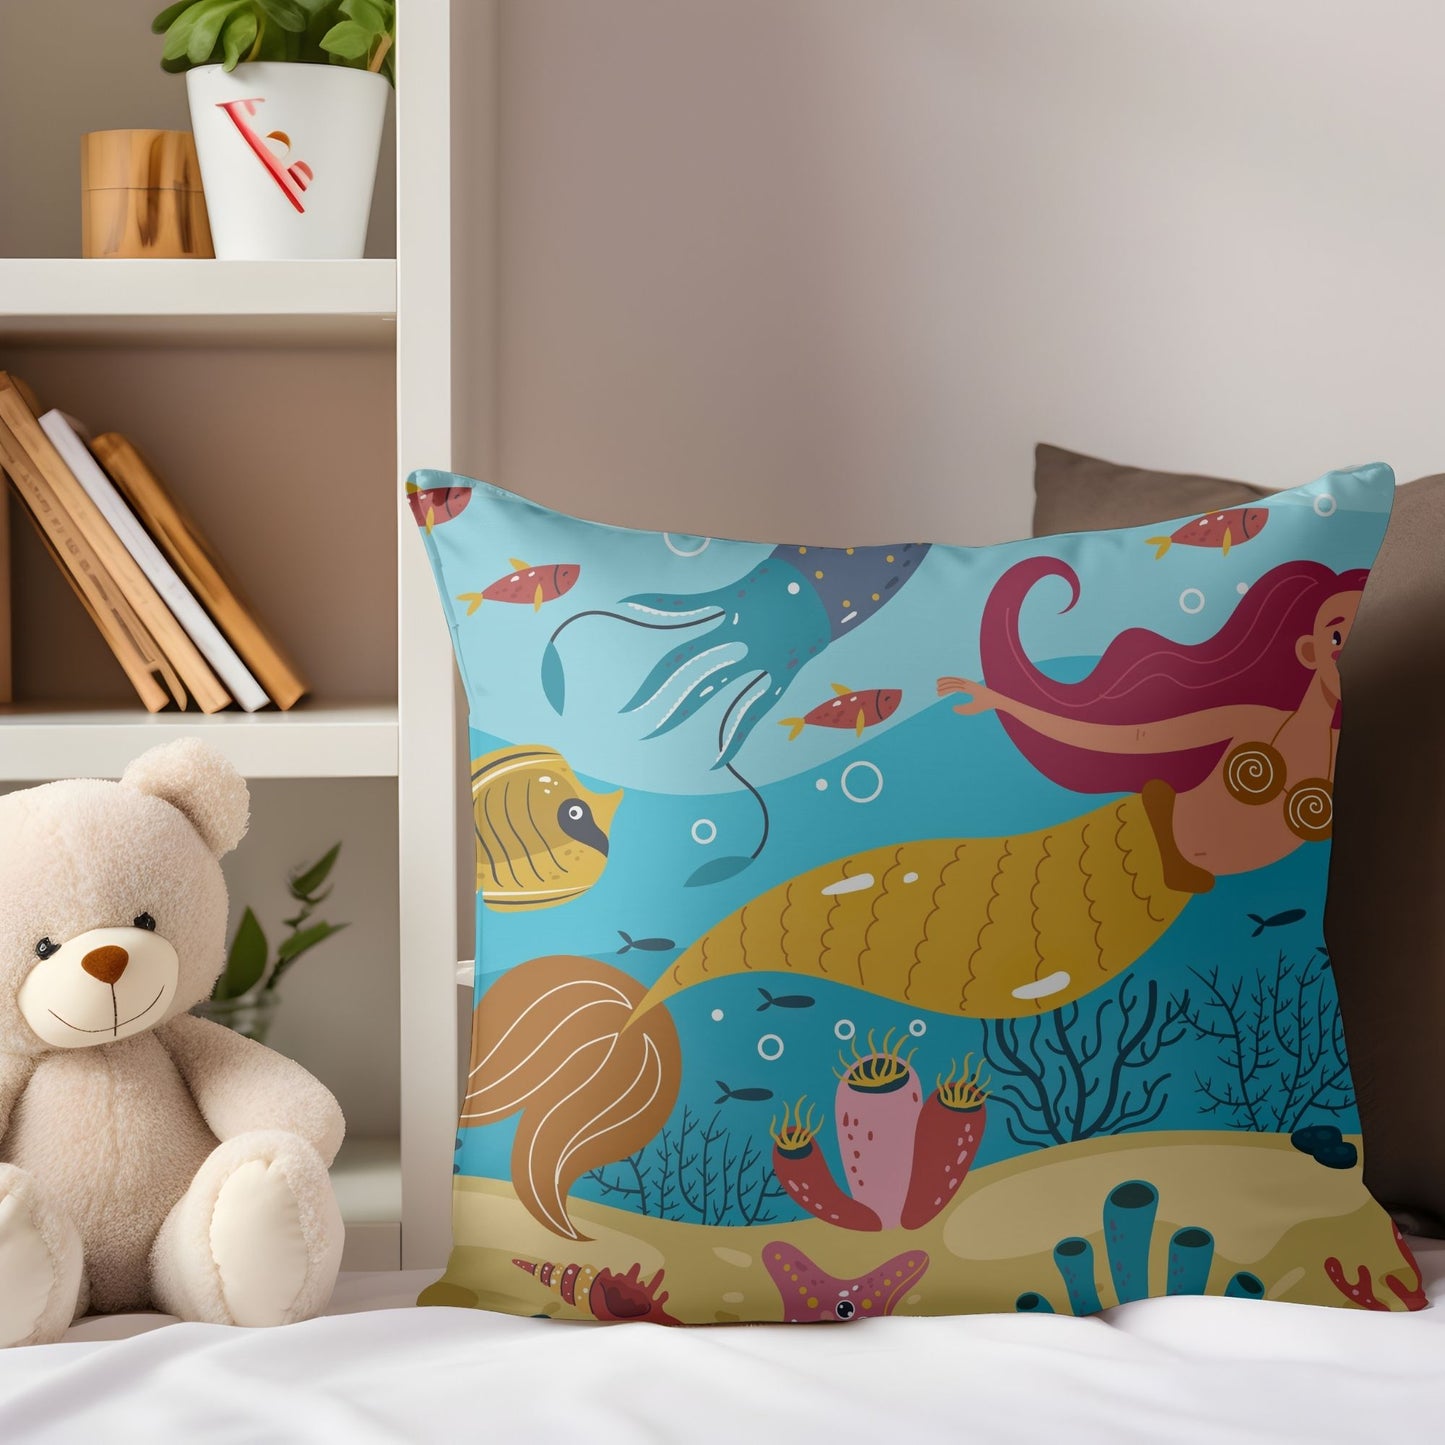 Soft and enchanting mermaid baby pillow for nursery comfort.